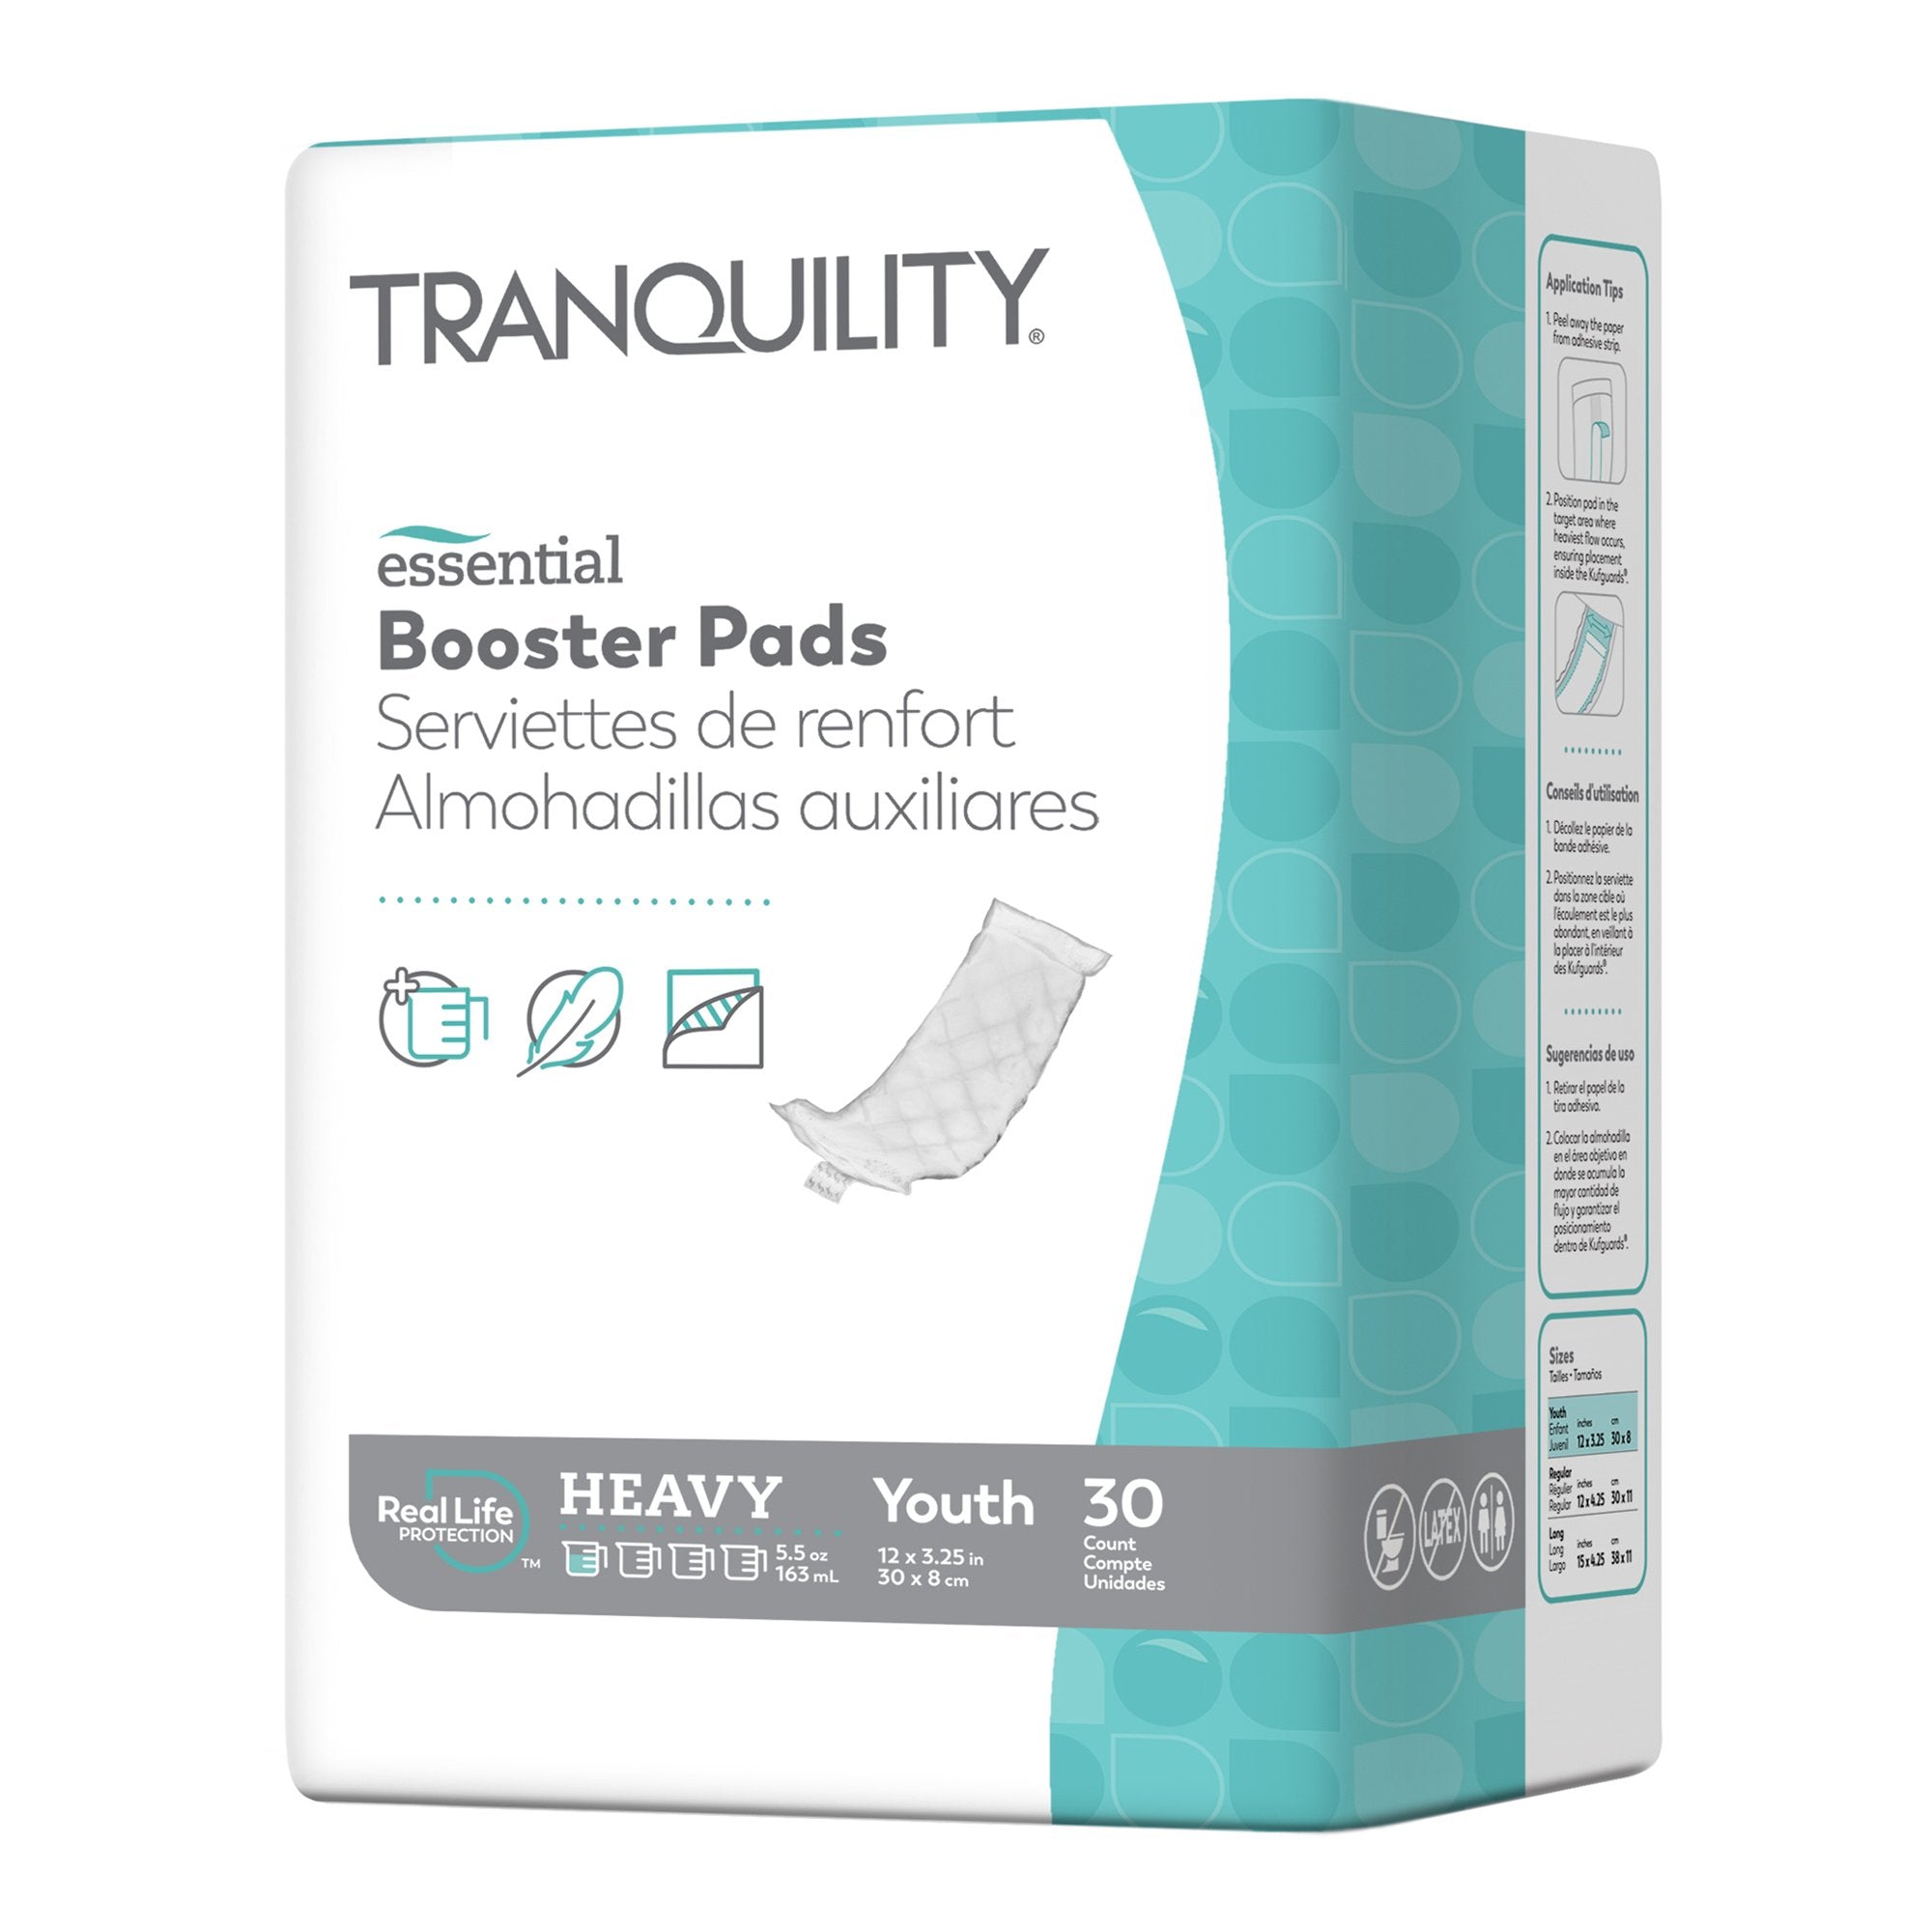 Booster Pad Tranquility® Essential 3-1/4 X 12 Inch Heavy Absorbency Superabsorbant Core One Size Fits Most